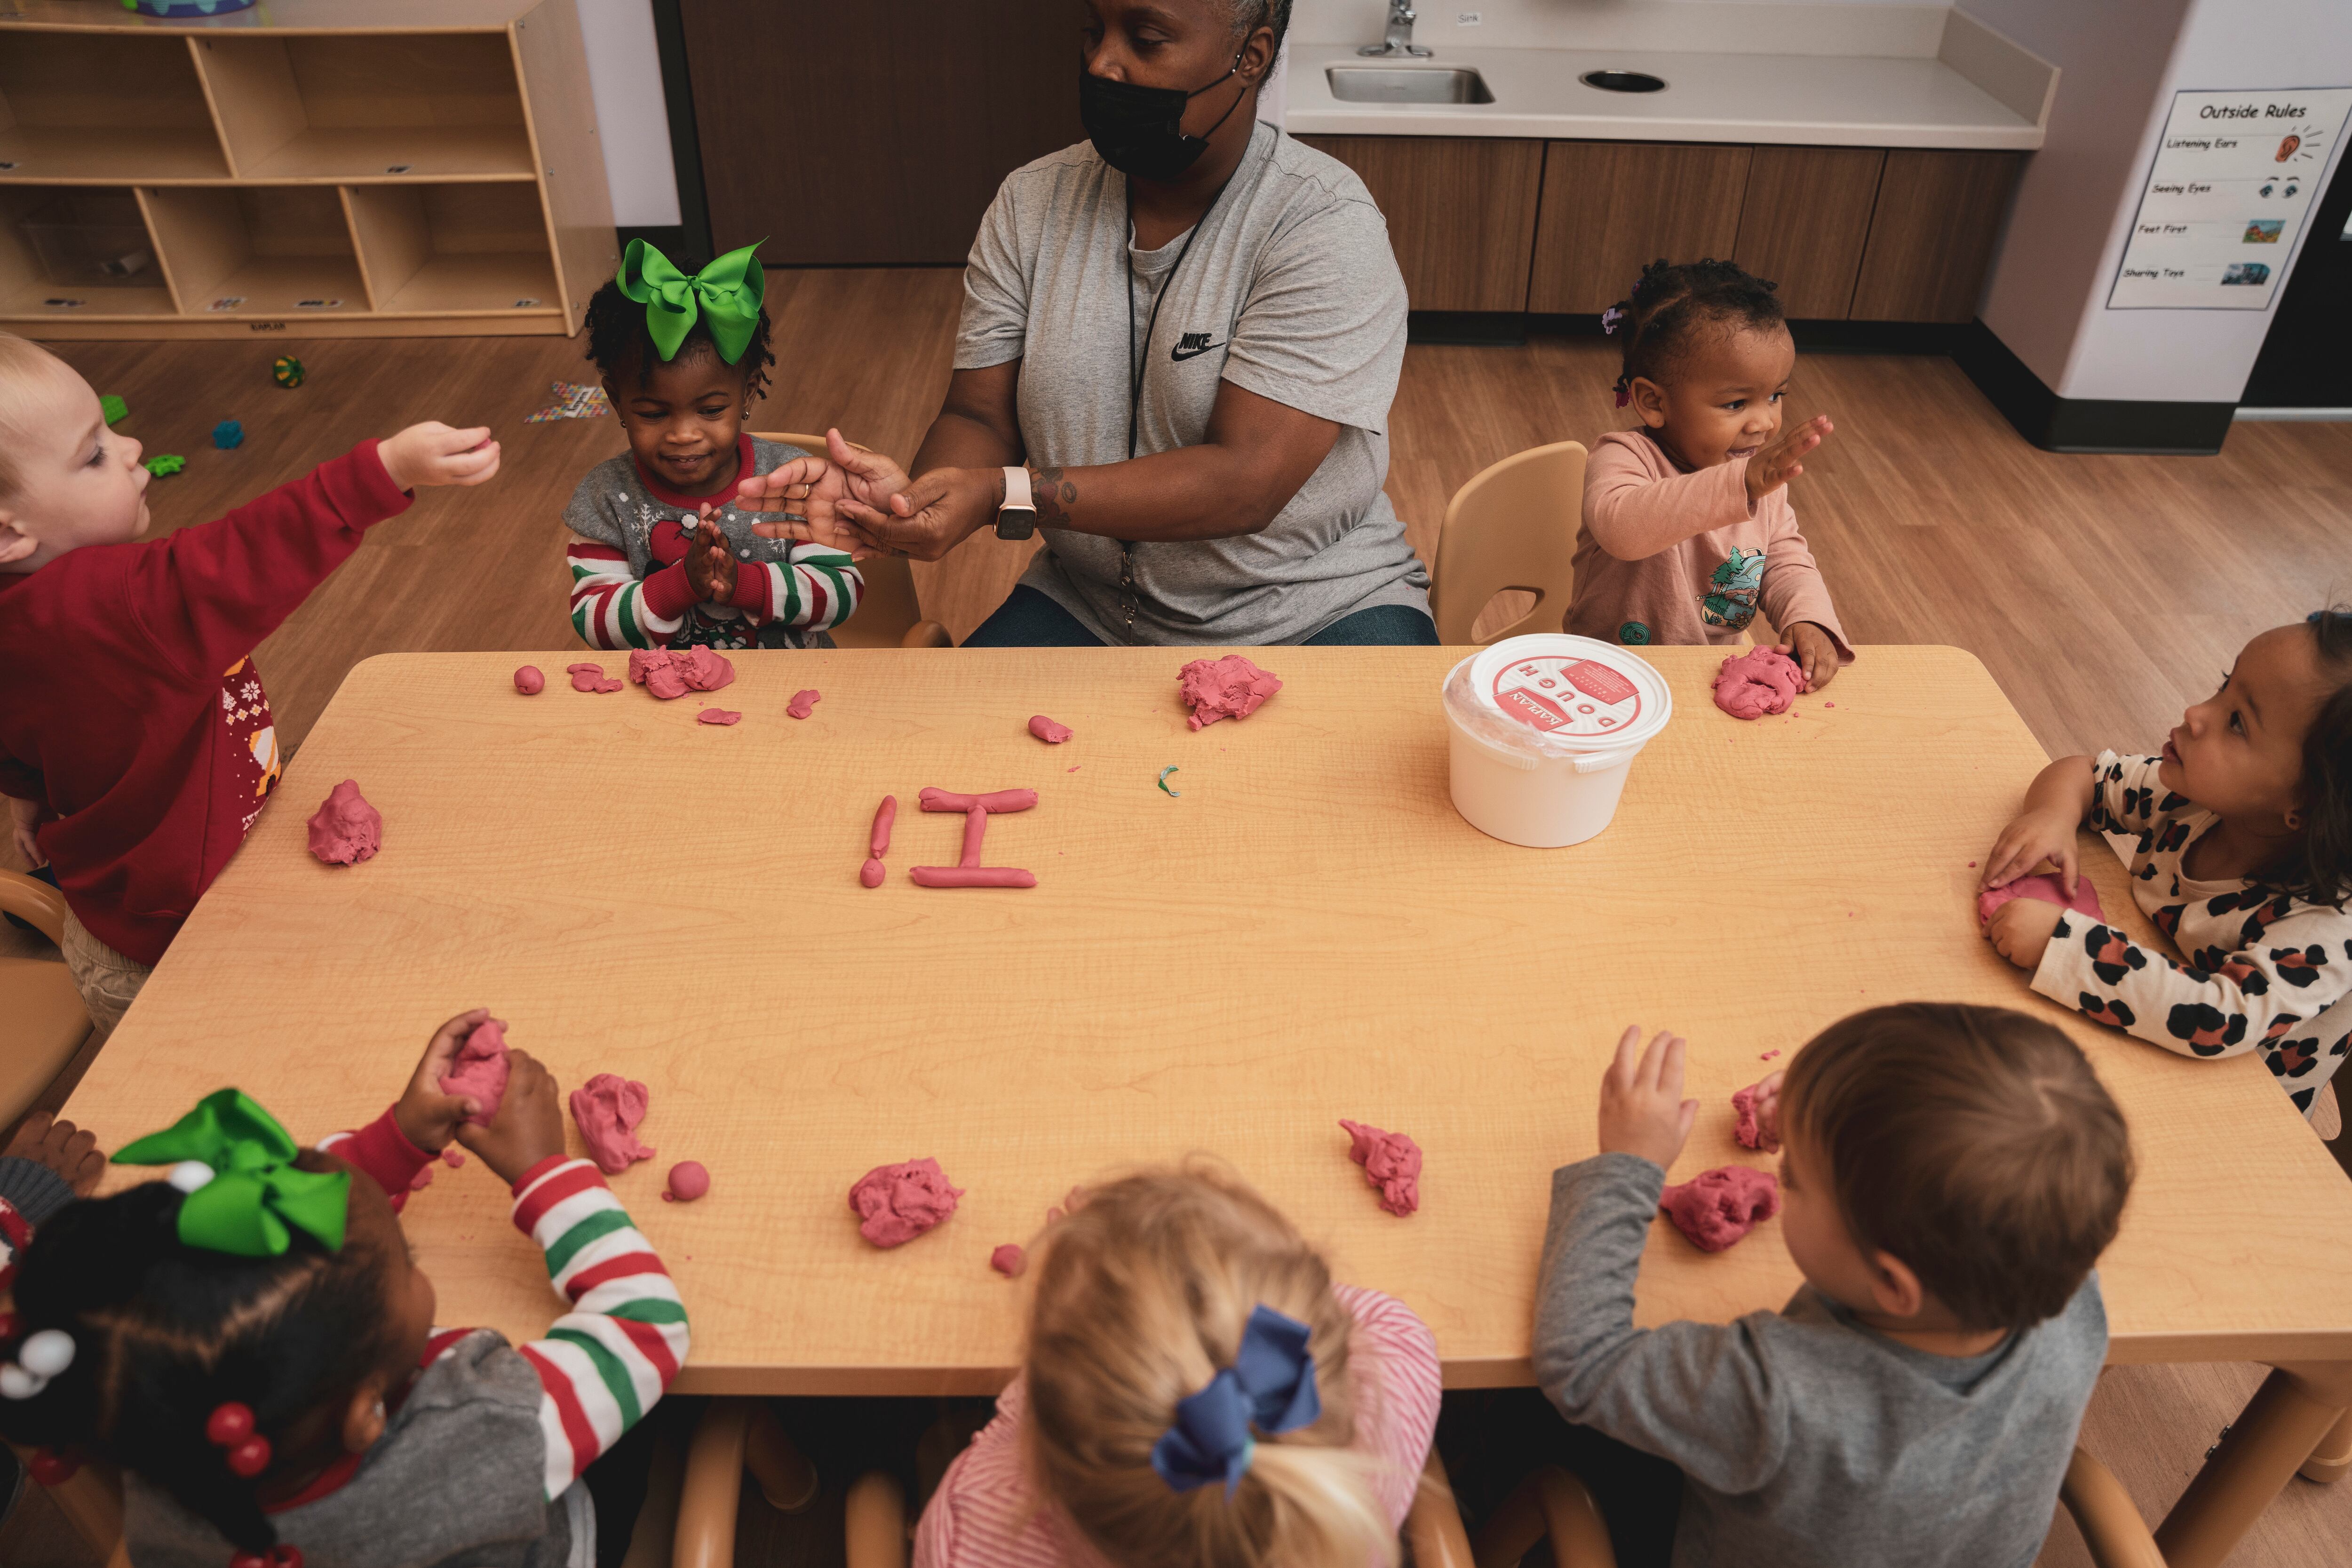 A preschool teacher at a table surrounded by children uses Play-Doh to shape letters of the alphabet.